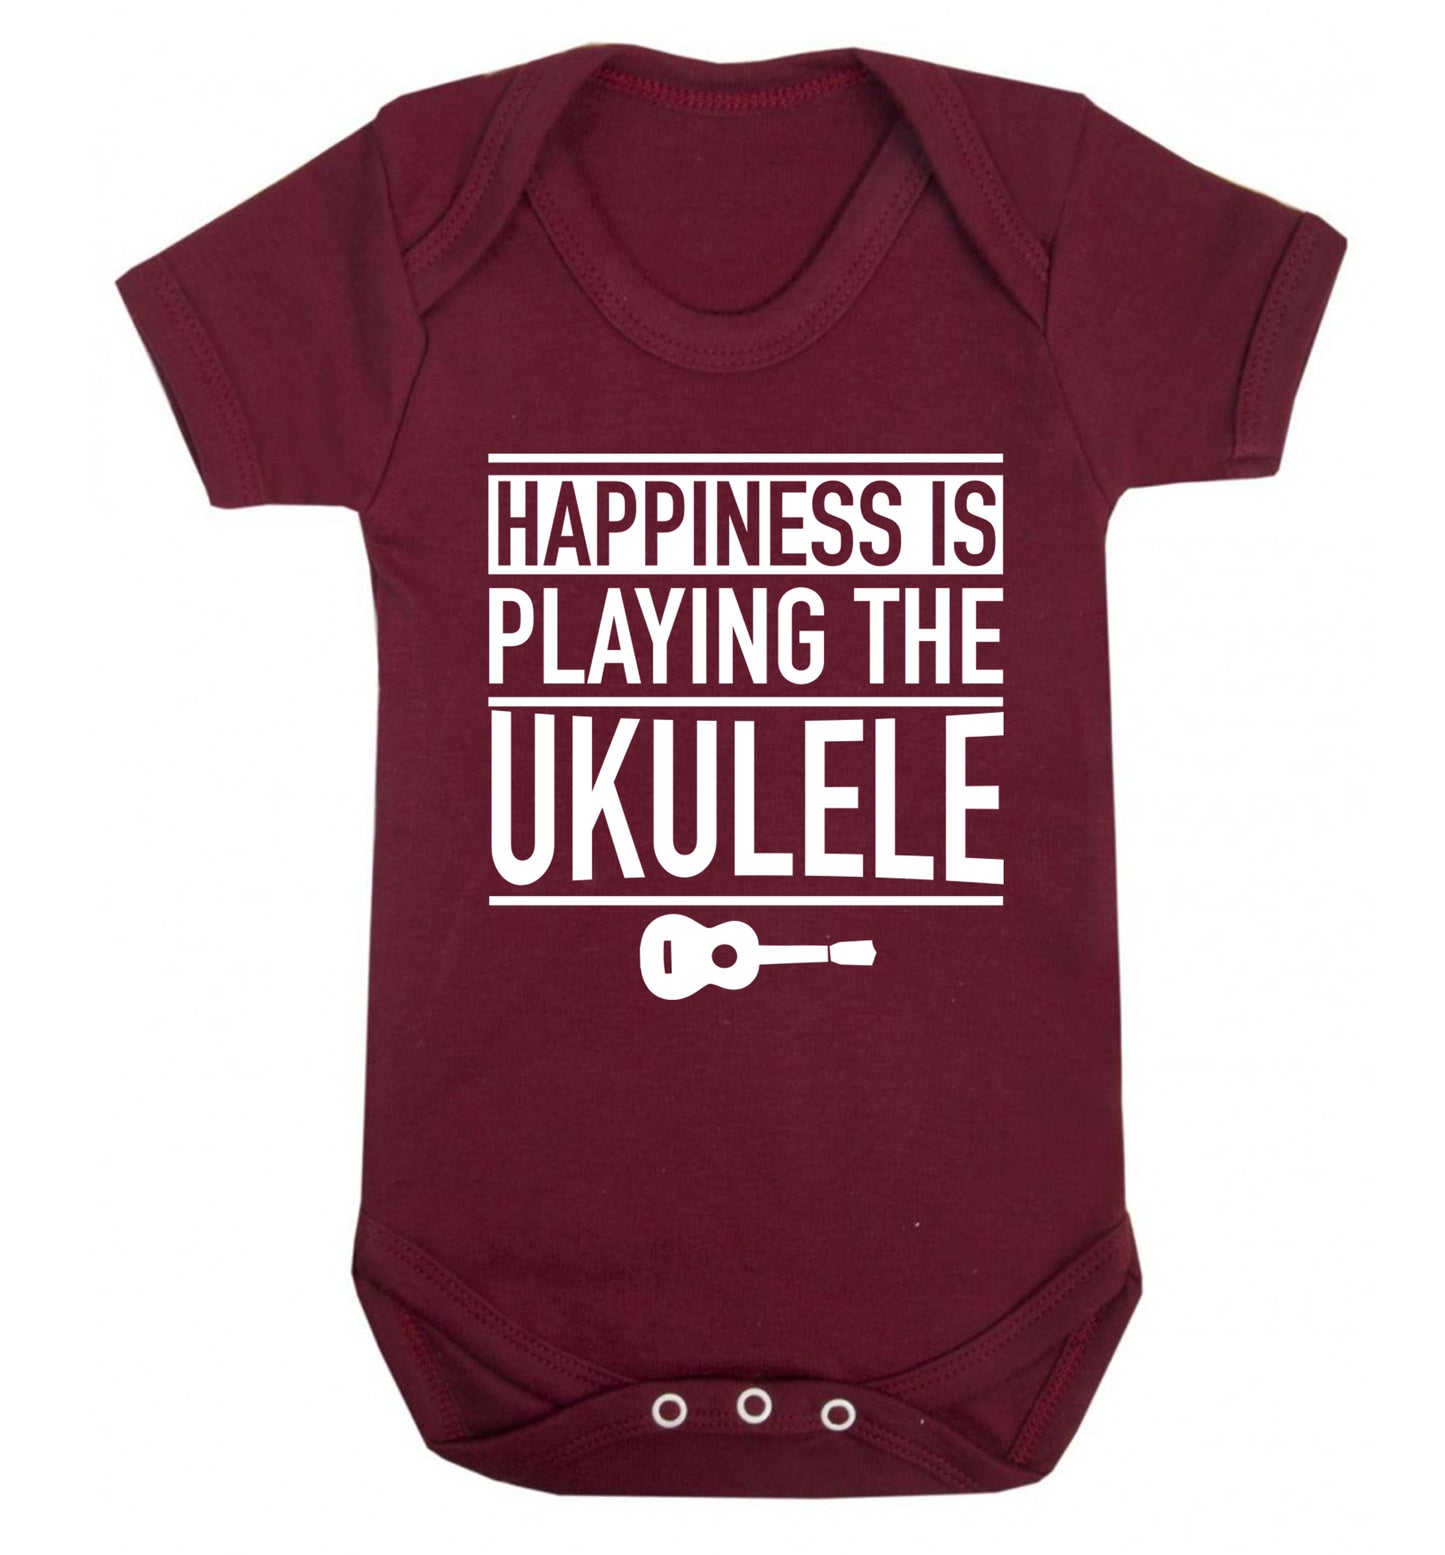 Happines is playing the ukulele Baby Vest maroon 18-24 months